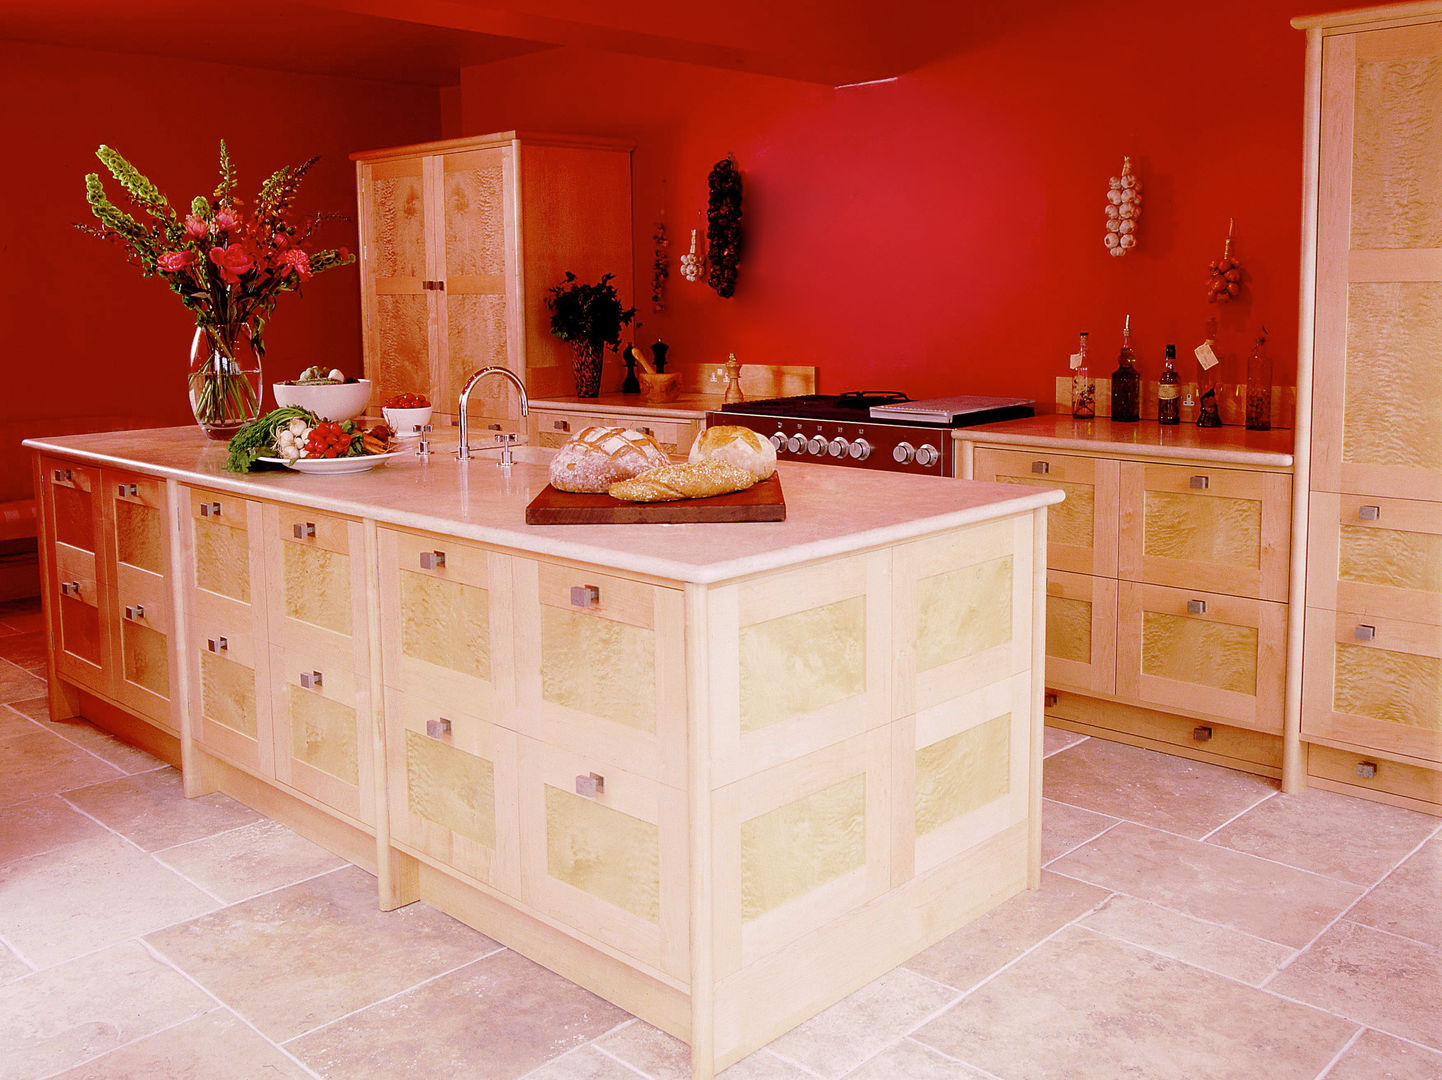 Quilted Maple Kitchen with Red Wall designed and made by Tim Wood Tim Wood Limited Cucina moderna Armadietti & Scaffali